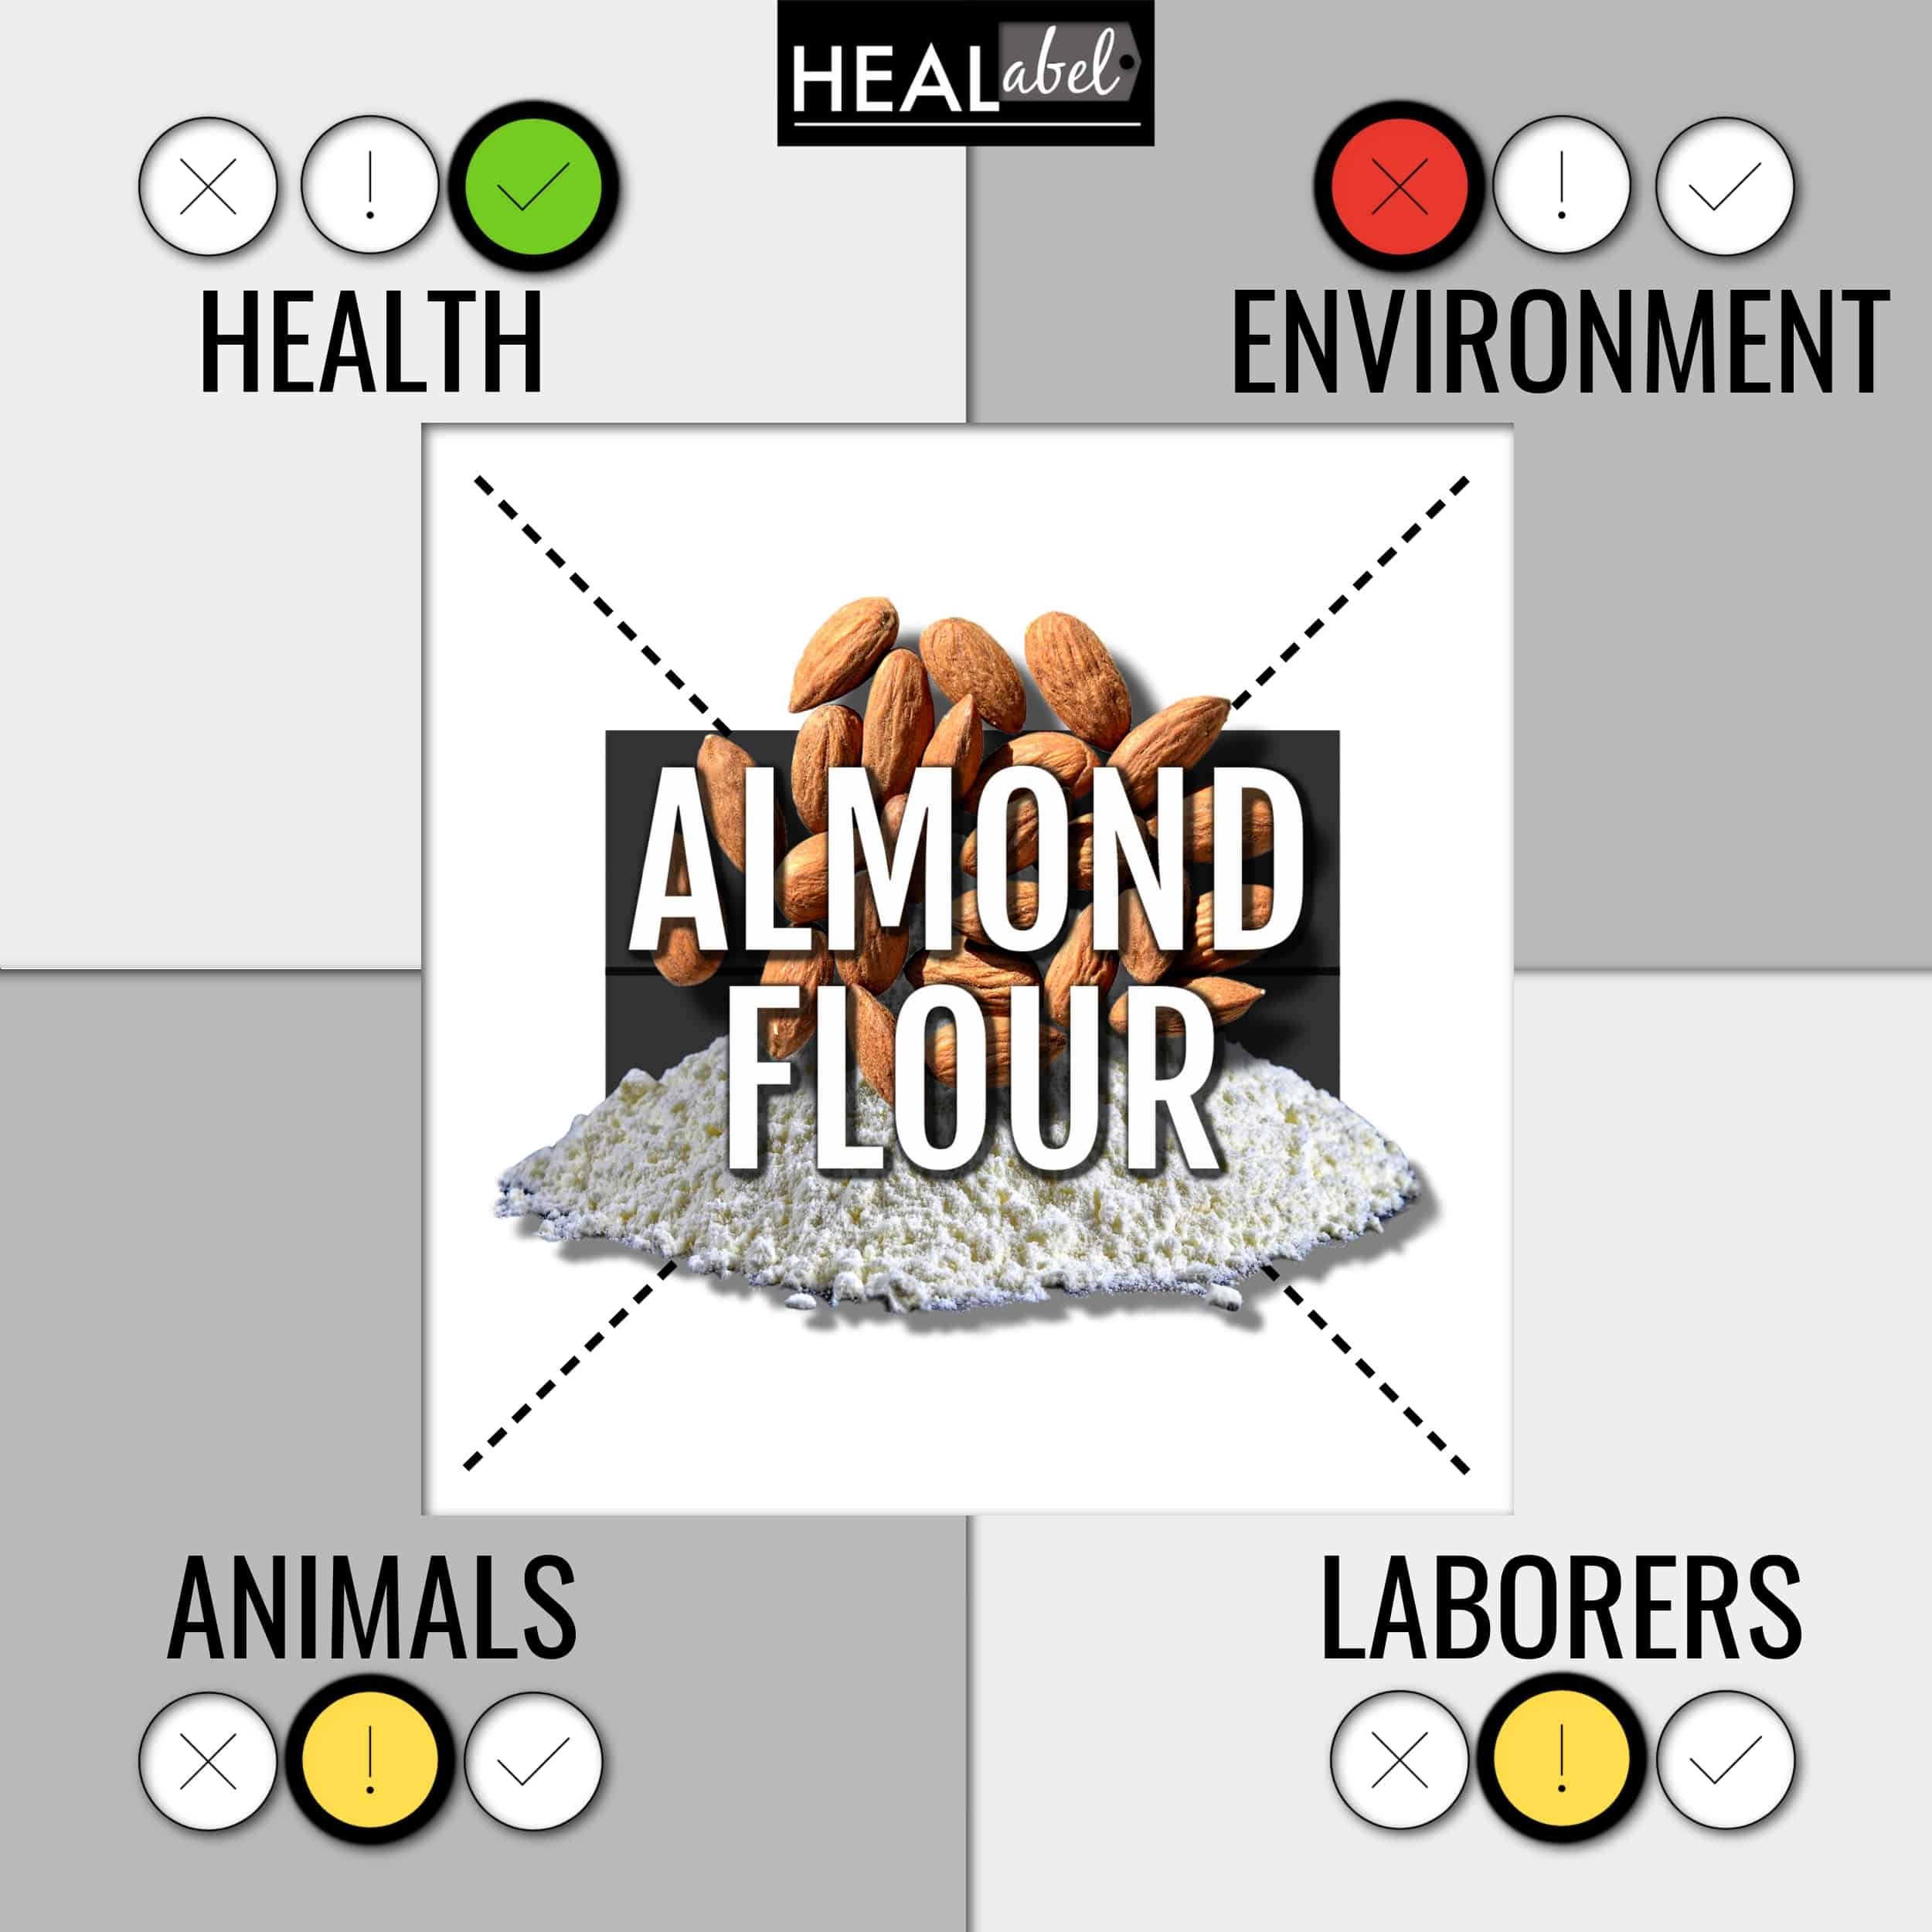 almond flour benefits and side effects